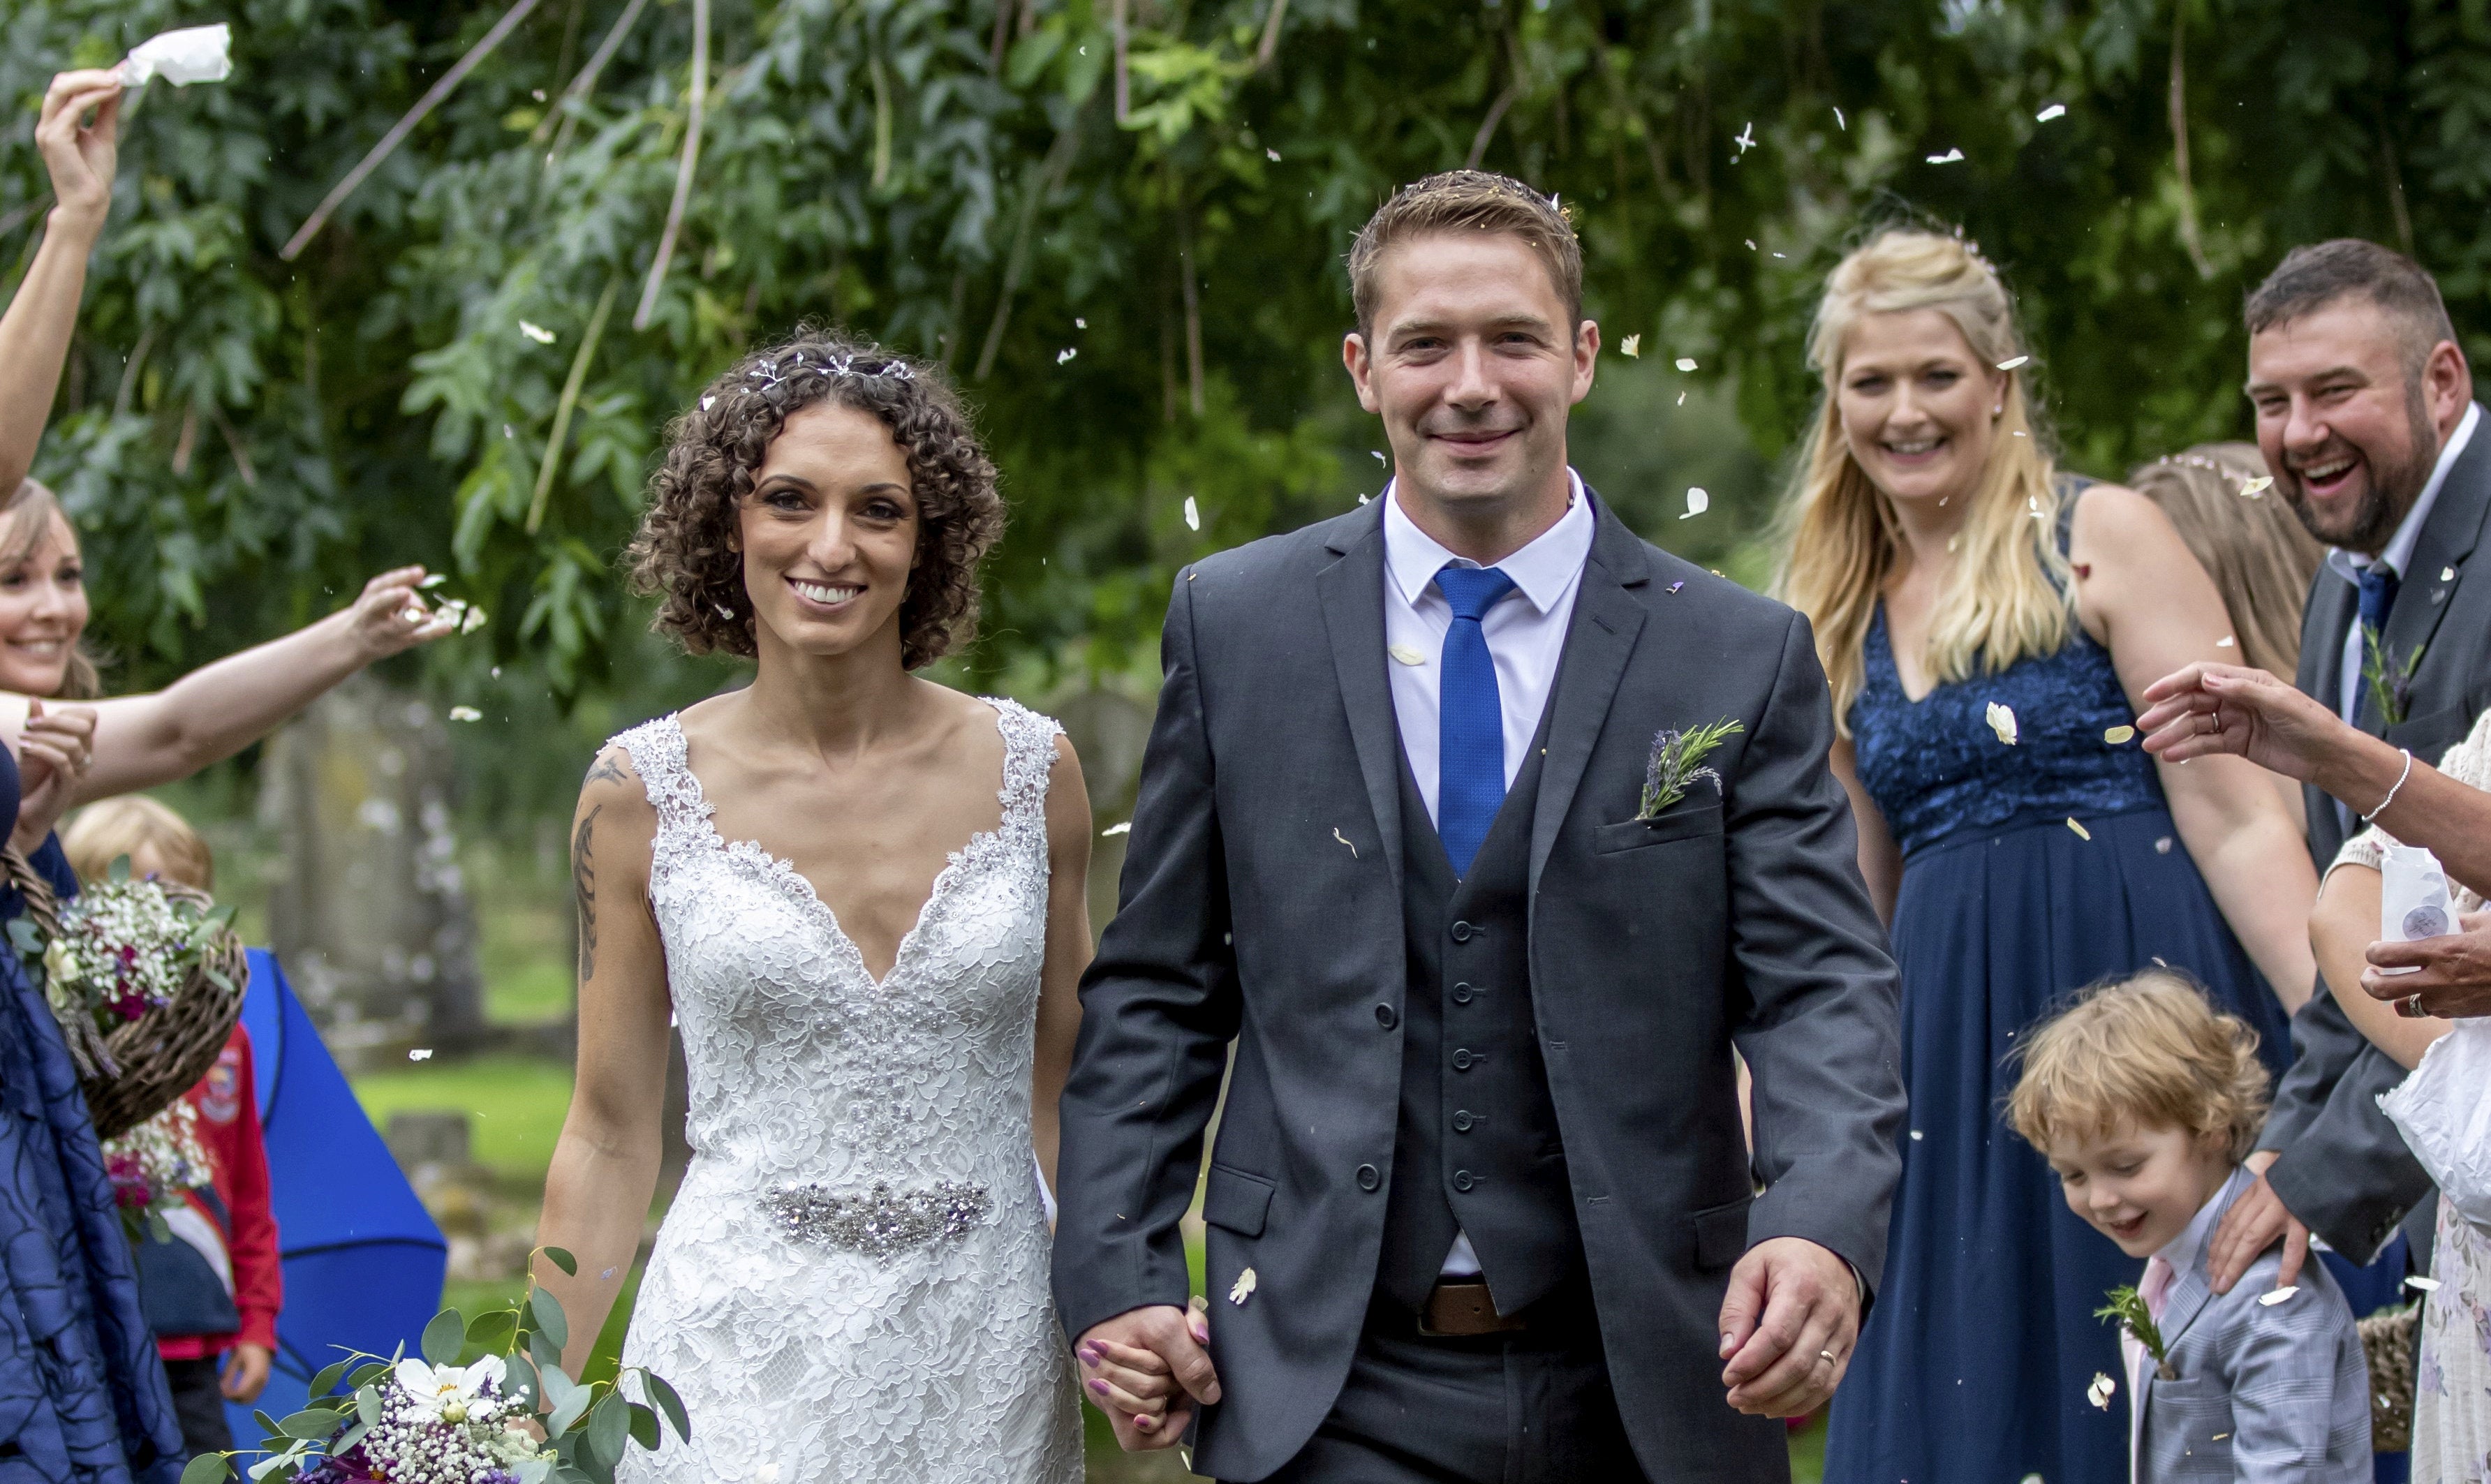 Alex Lilley and Dan Lilley who live in Harby, Nottinghamshirecreated their dream wedding with 130 guests for just £4,000